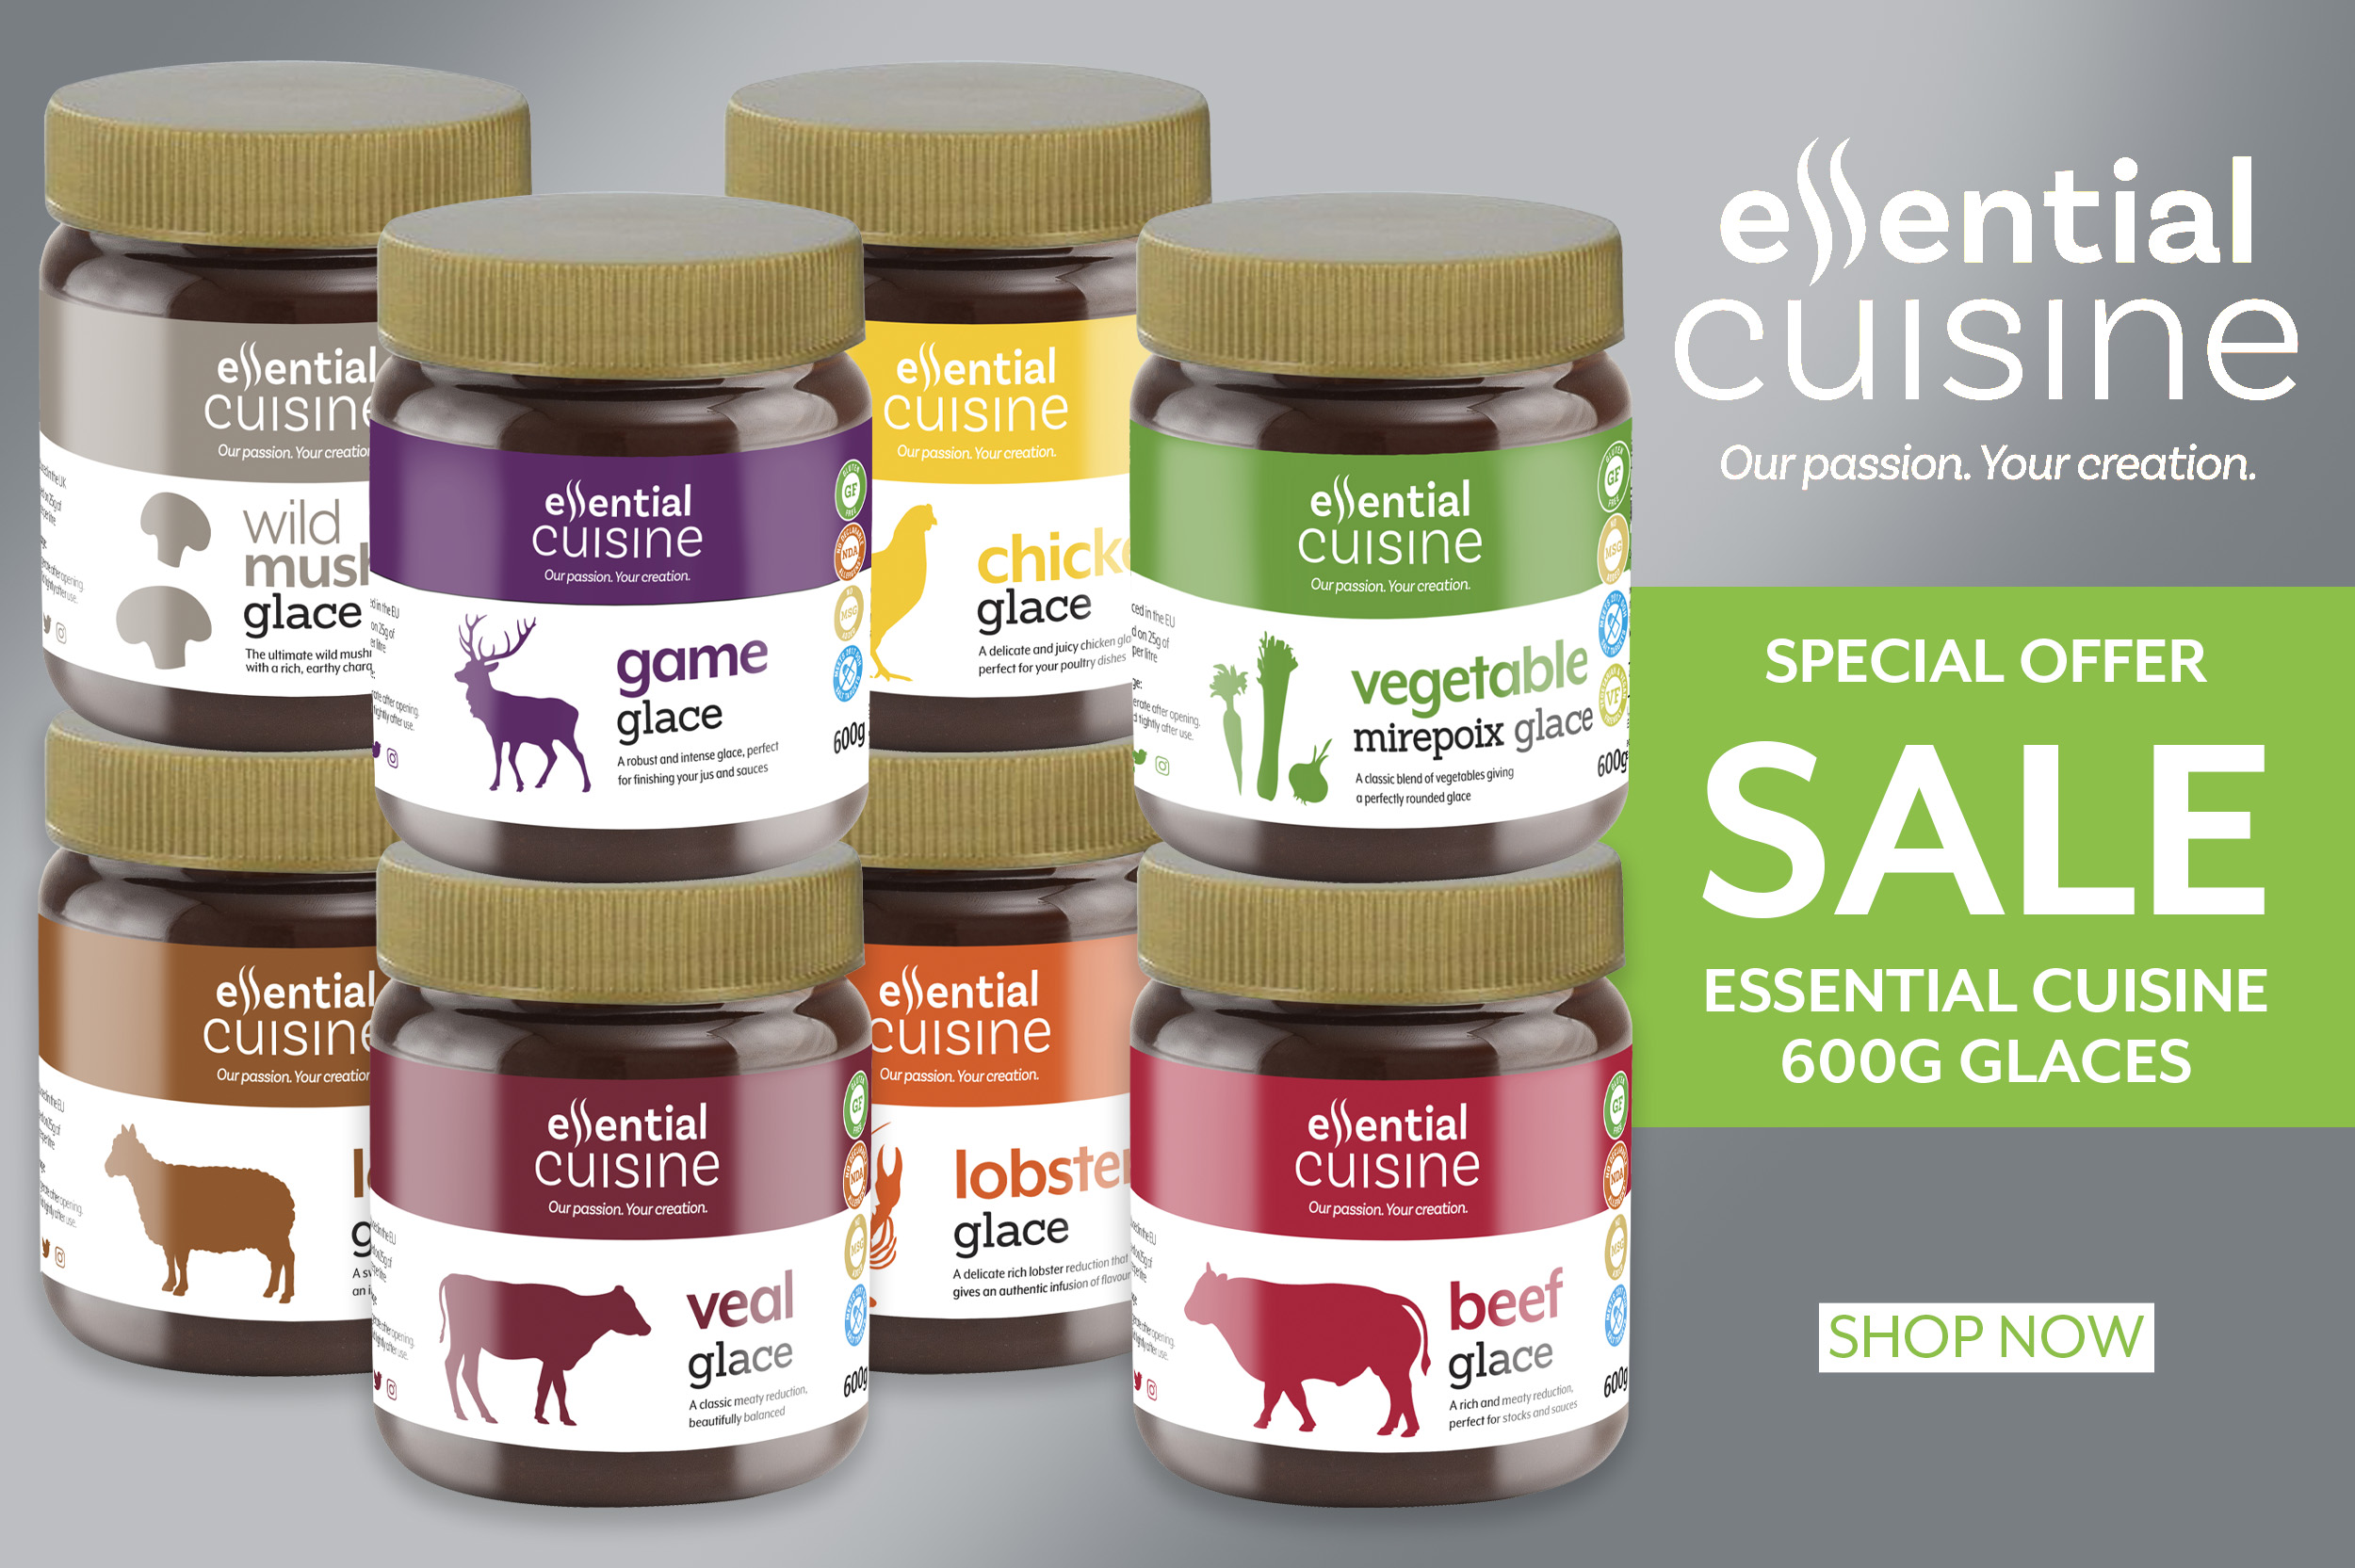 Essential Cuisine special offer sale essential cuisine 600g glaces shop now on a grey background next to a pile of essential cuisine glaces